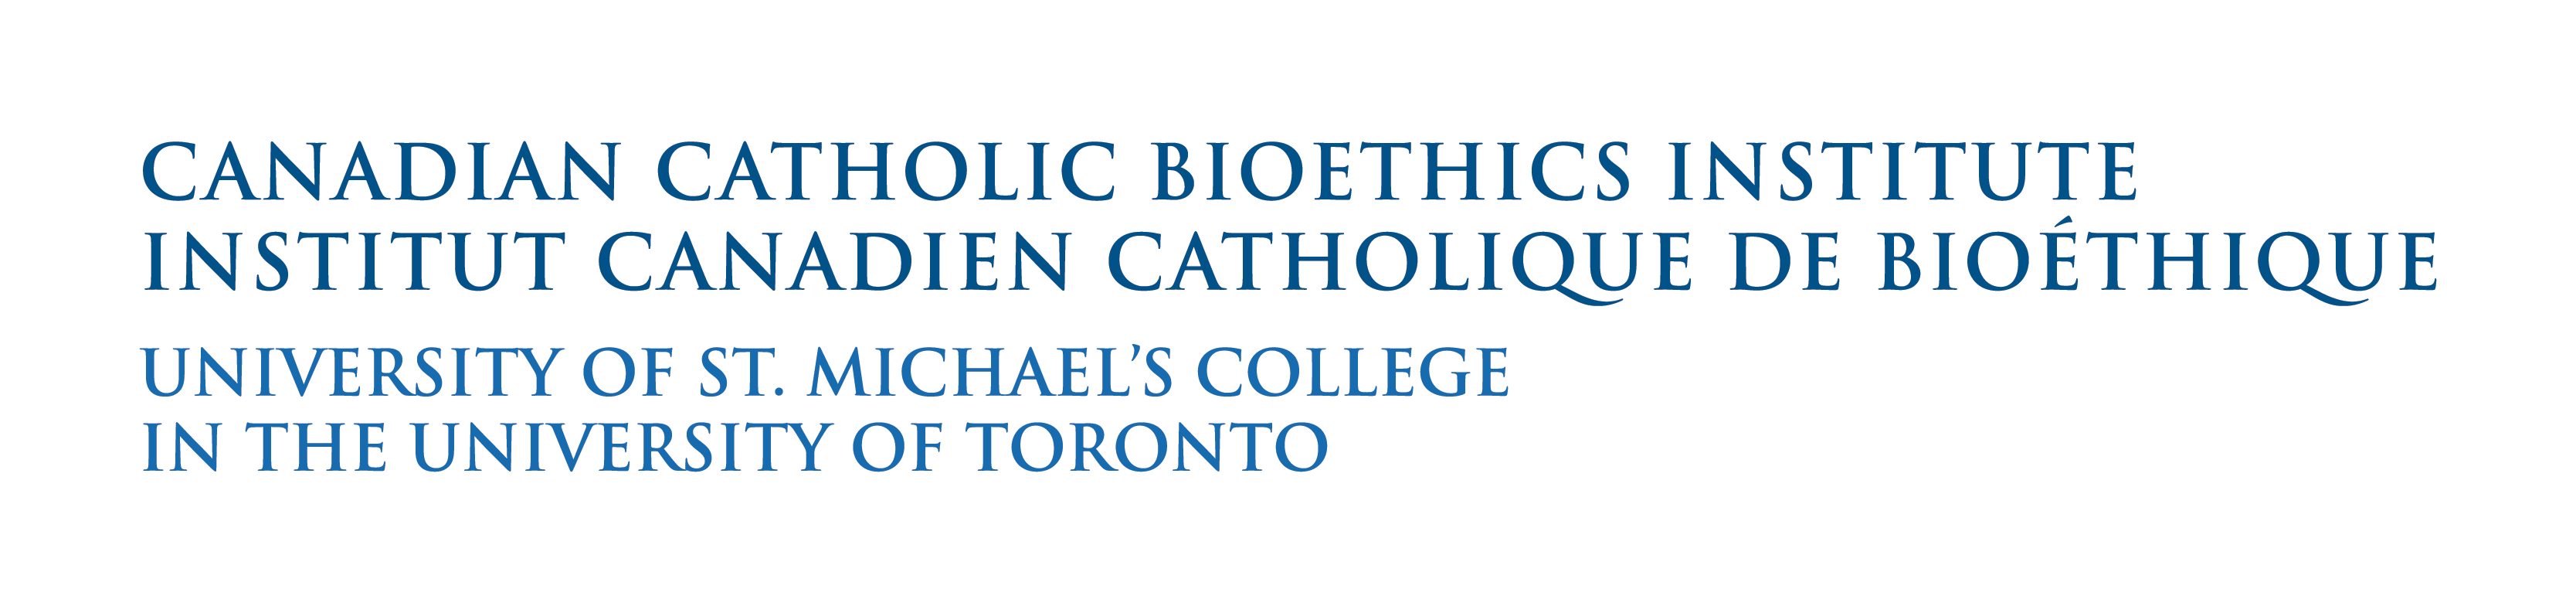 Canadian Catholic Bioethics Institute - Affiliated with the University of St. Michael's College in the University of Toronto